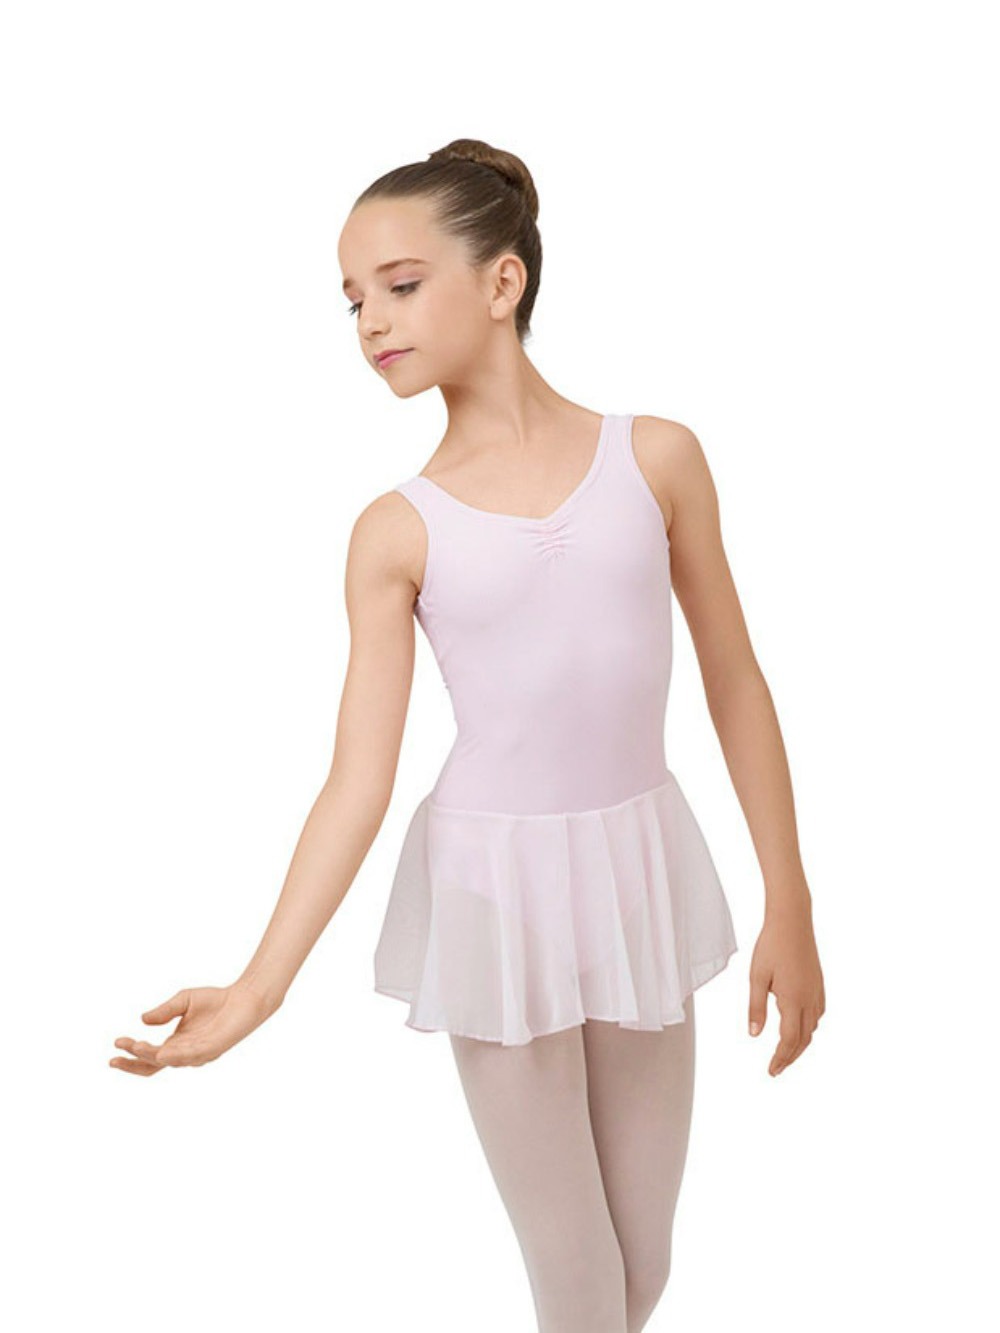 GATHERED NECKLINE TUNIC FOR GIRLS - PALE PINK